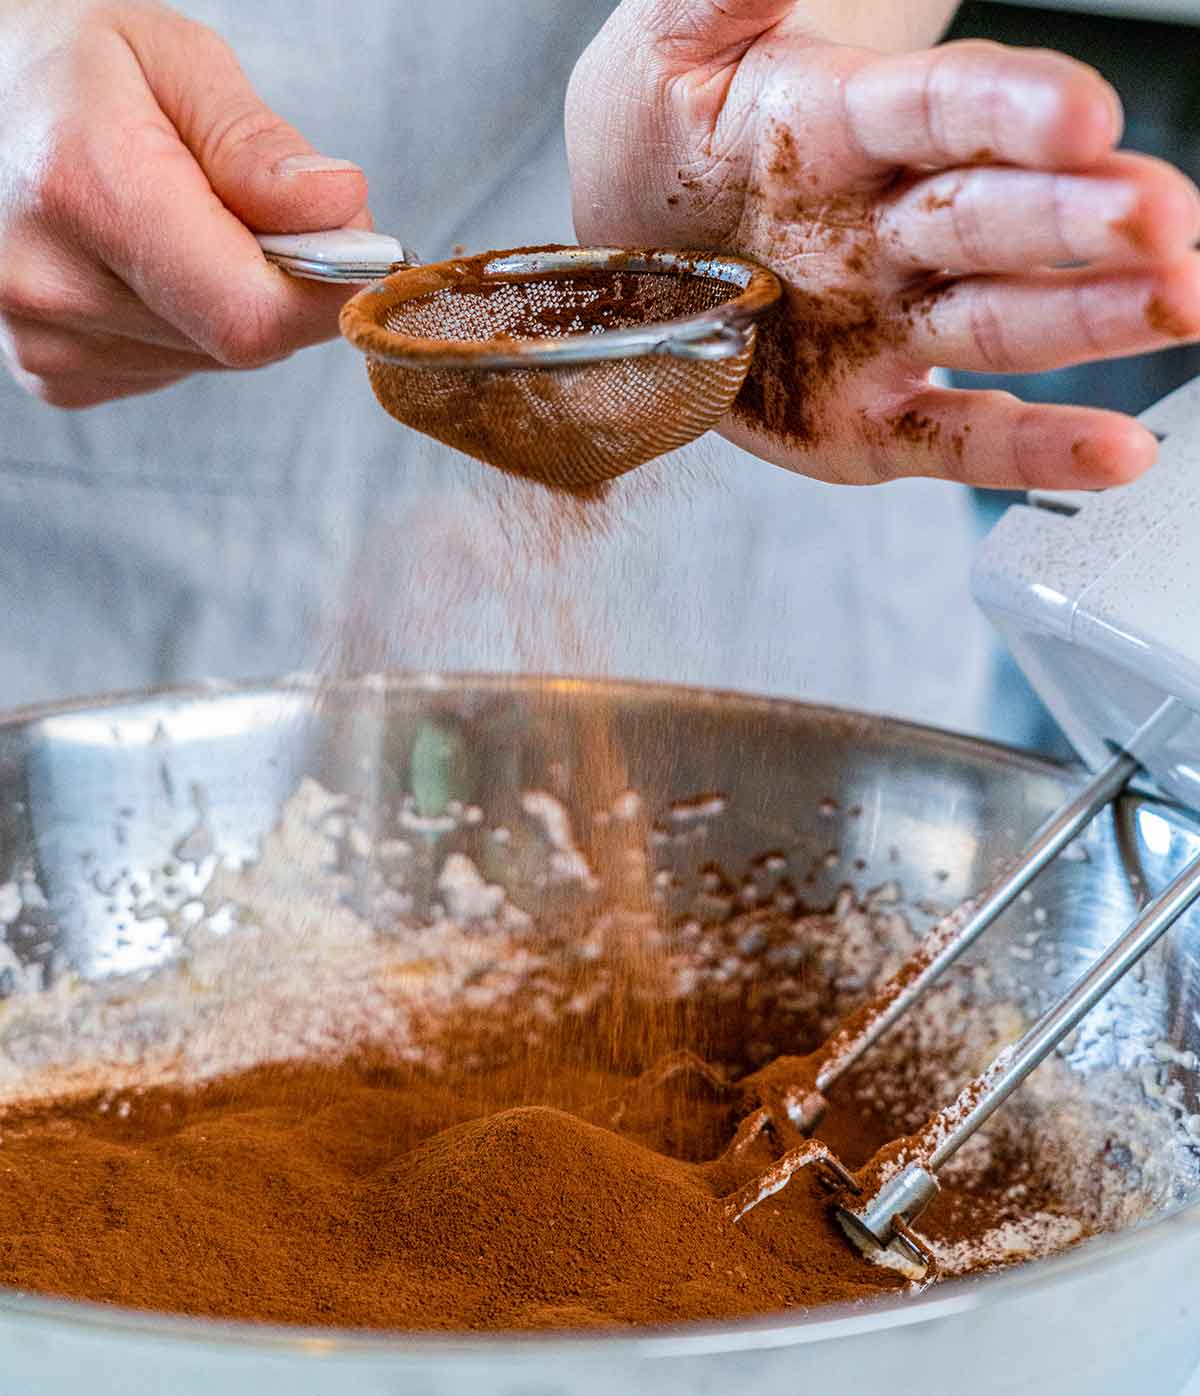 using hands to sieve cocoa powder into a bowl